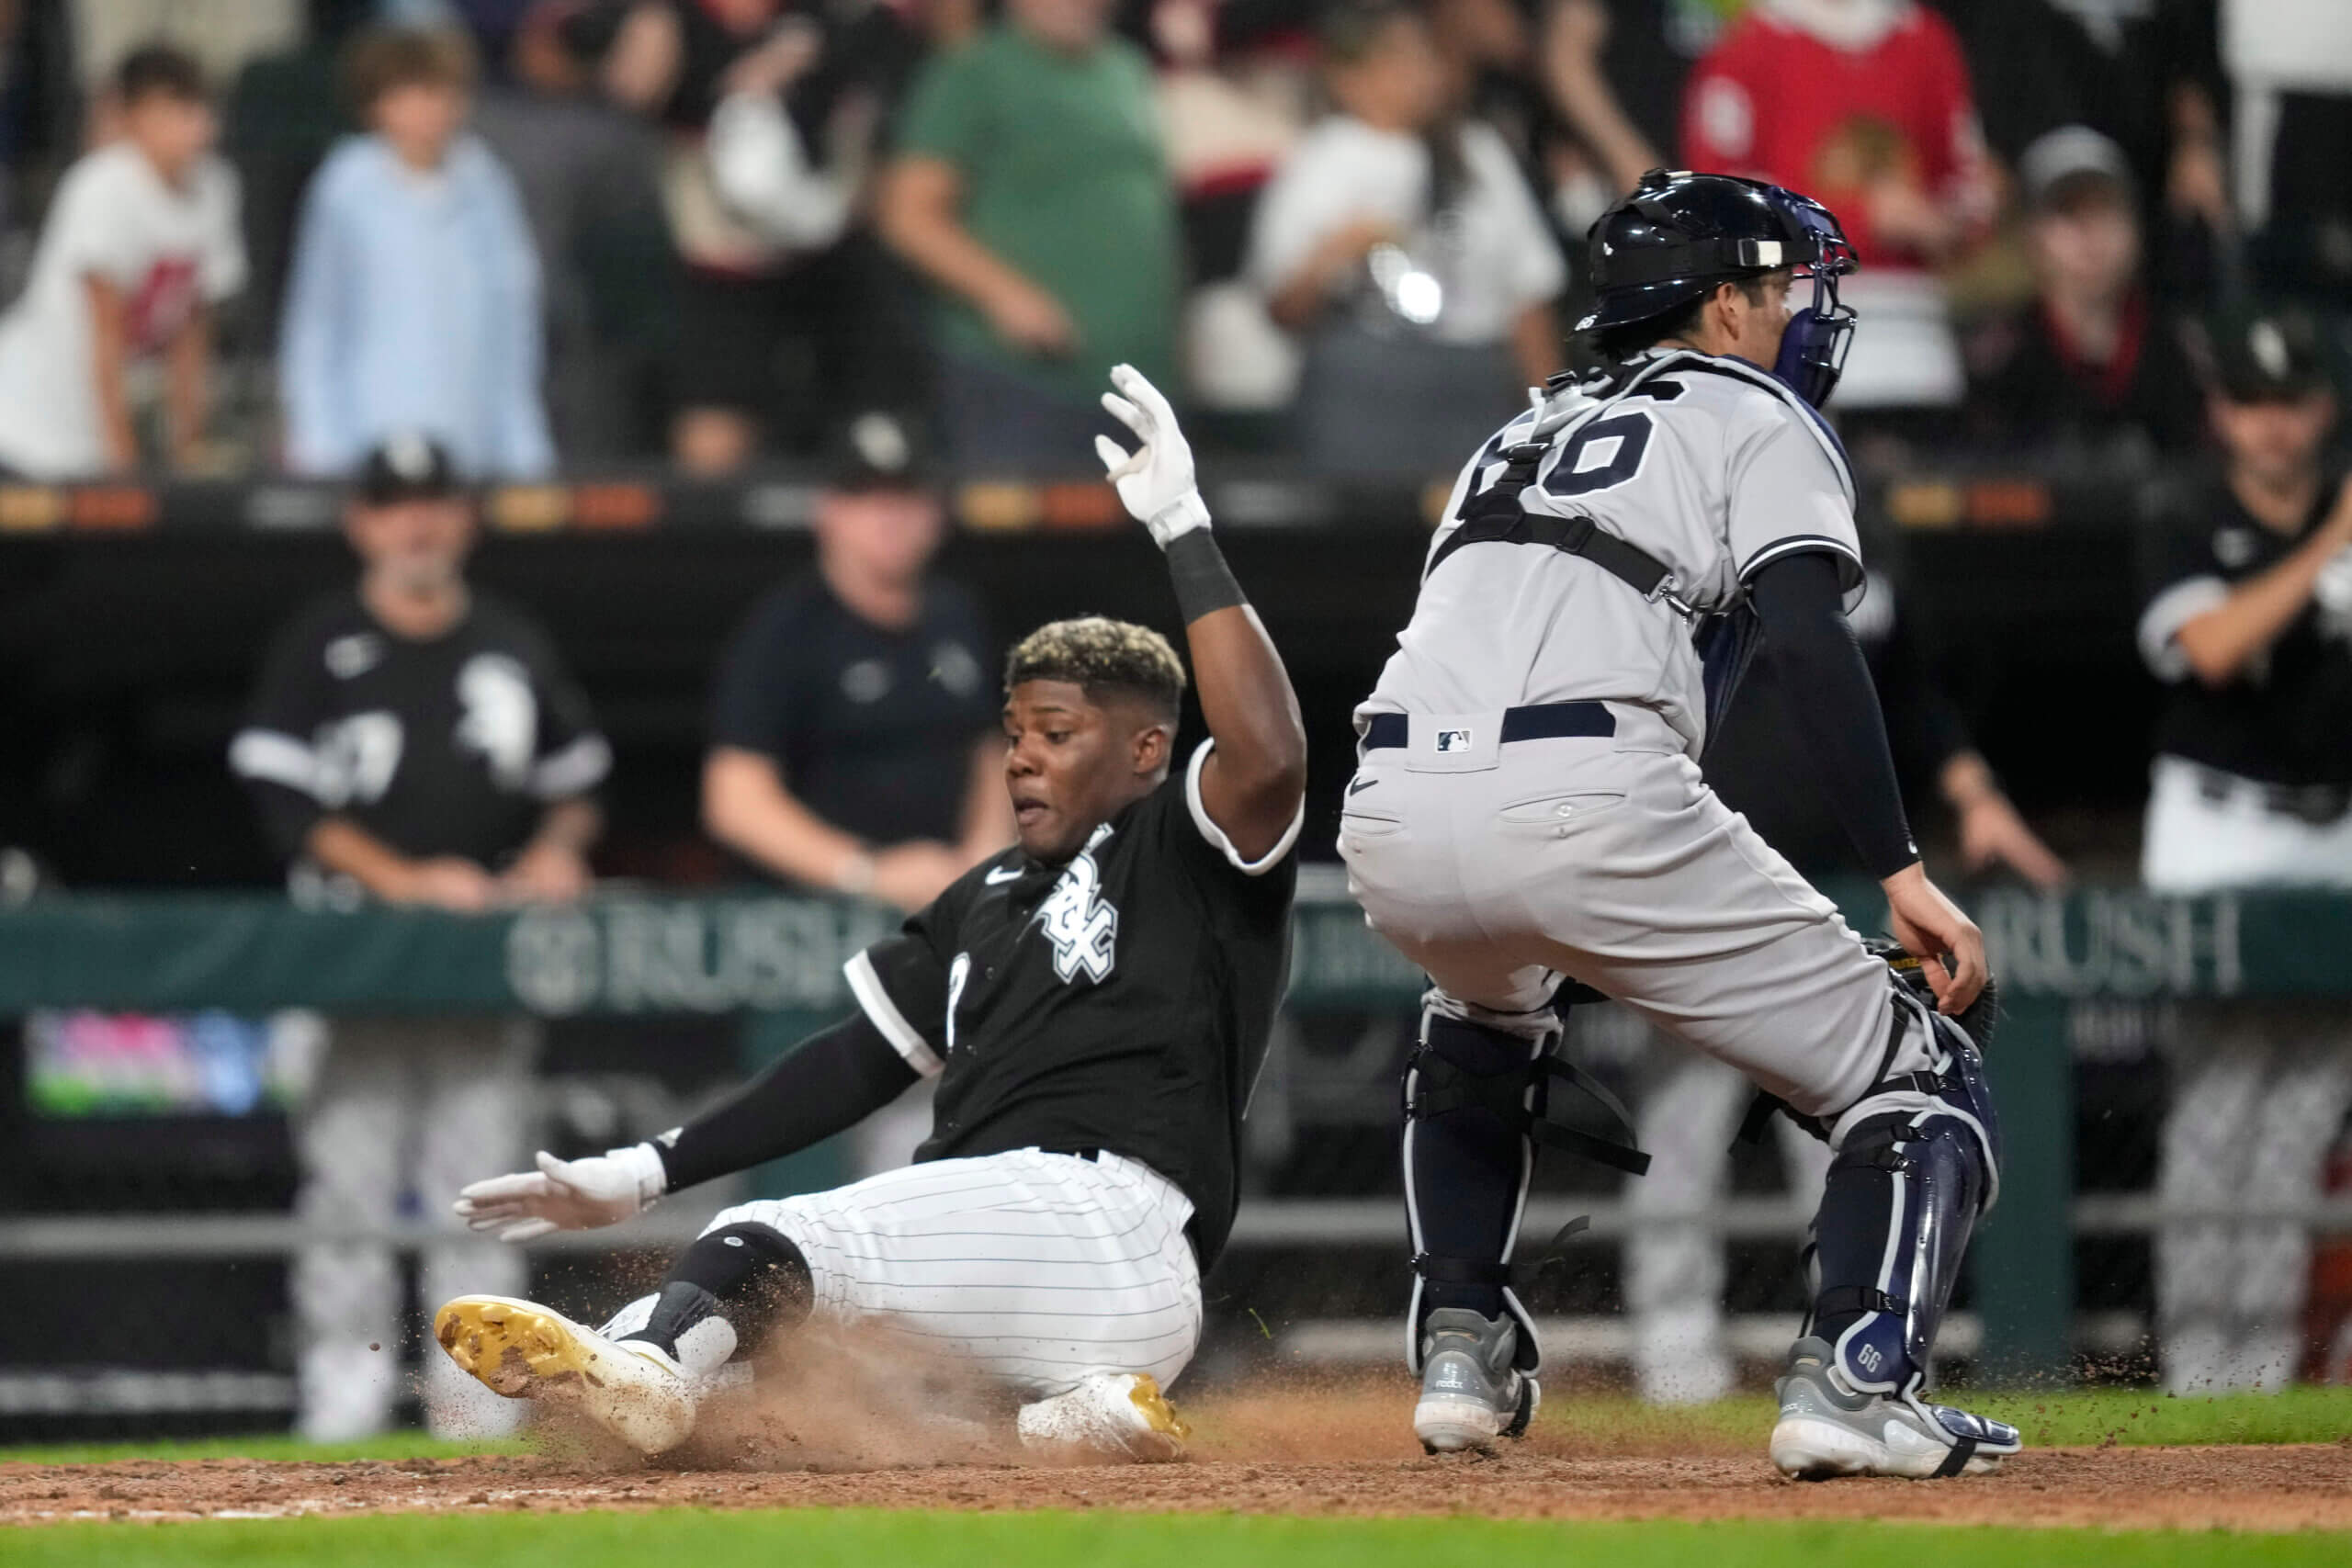 Luis Robert injury updates: White Sox OF goes on 10-day IL with  lightheadedness - DraftKings Network